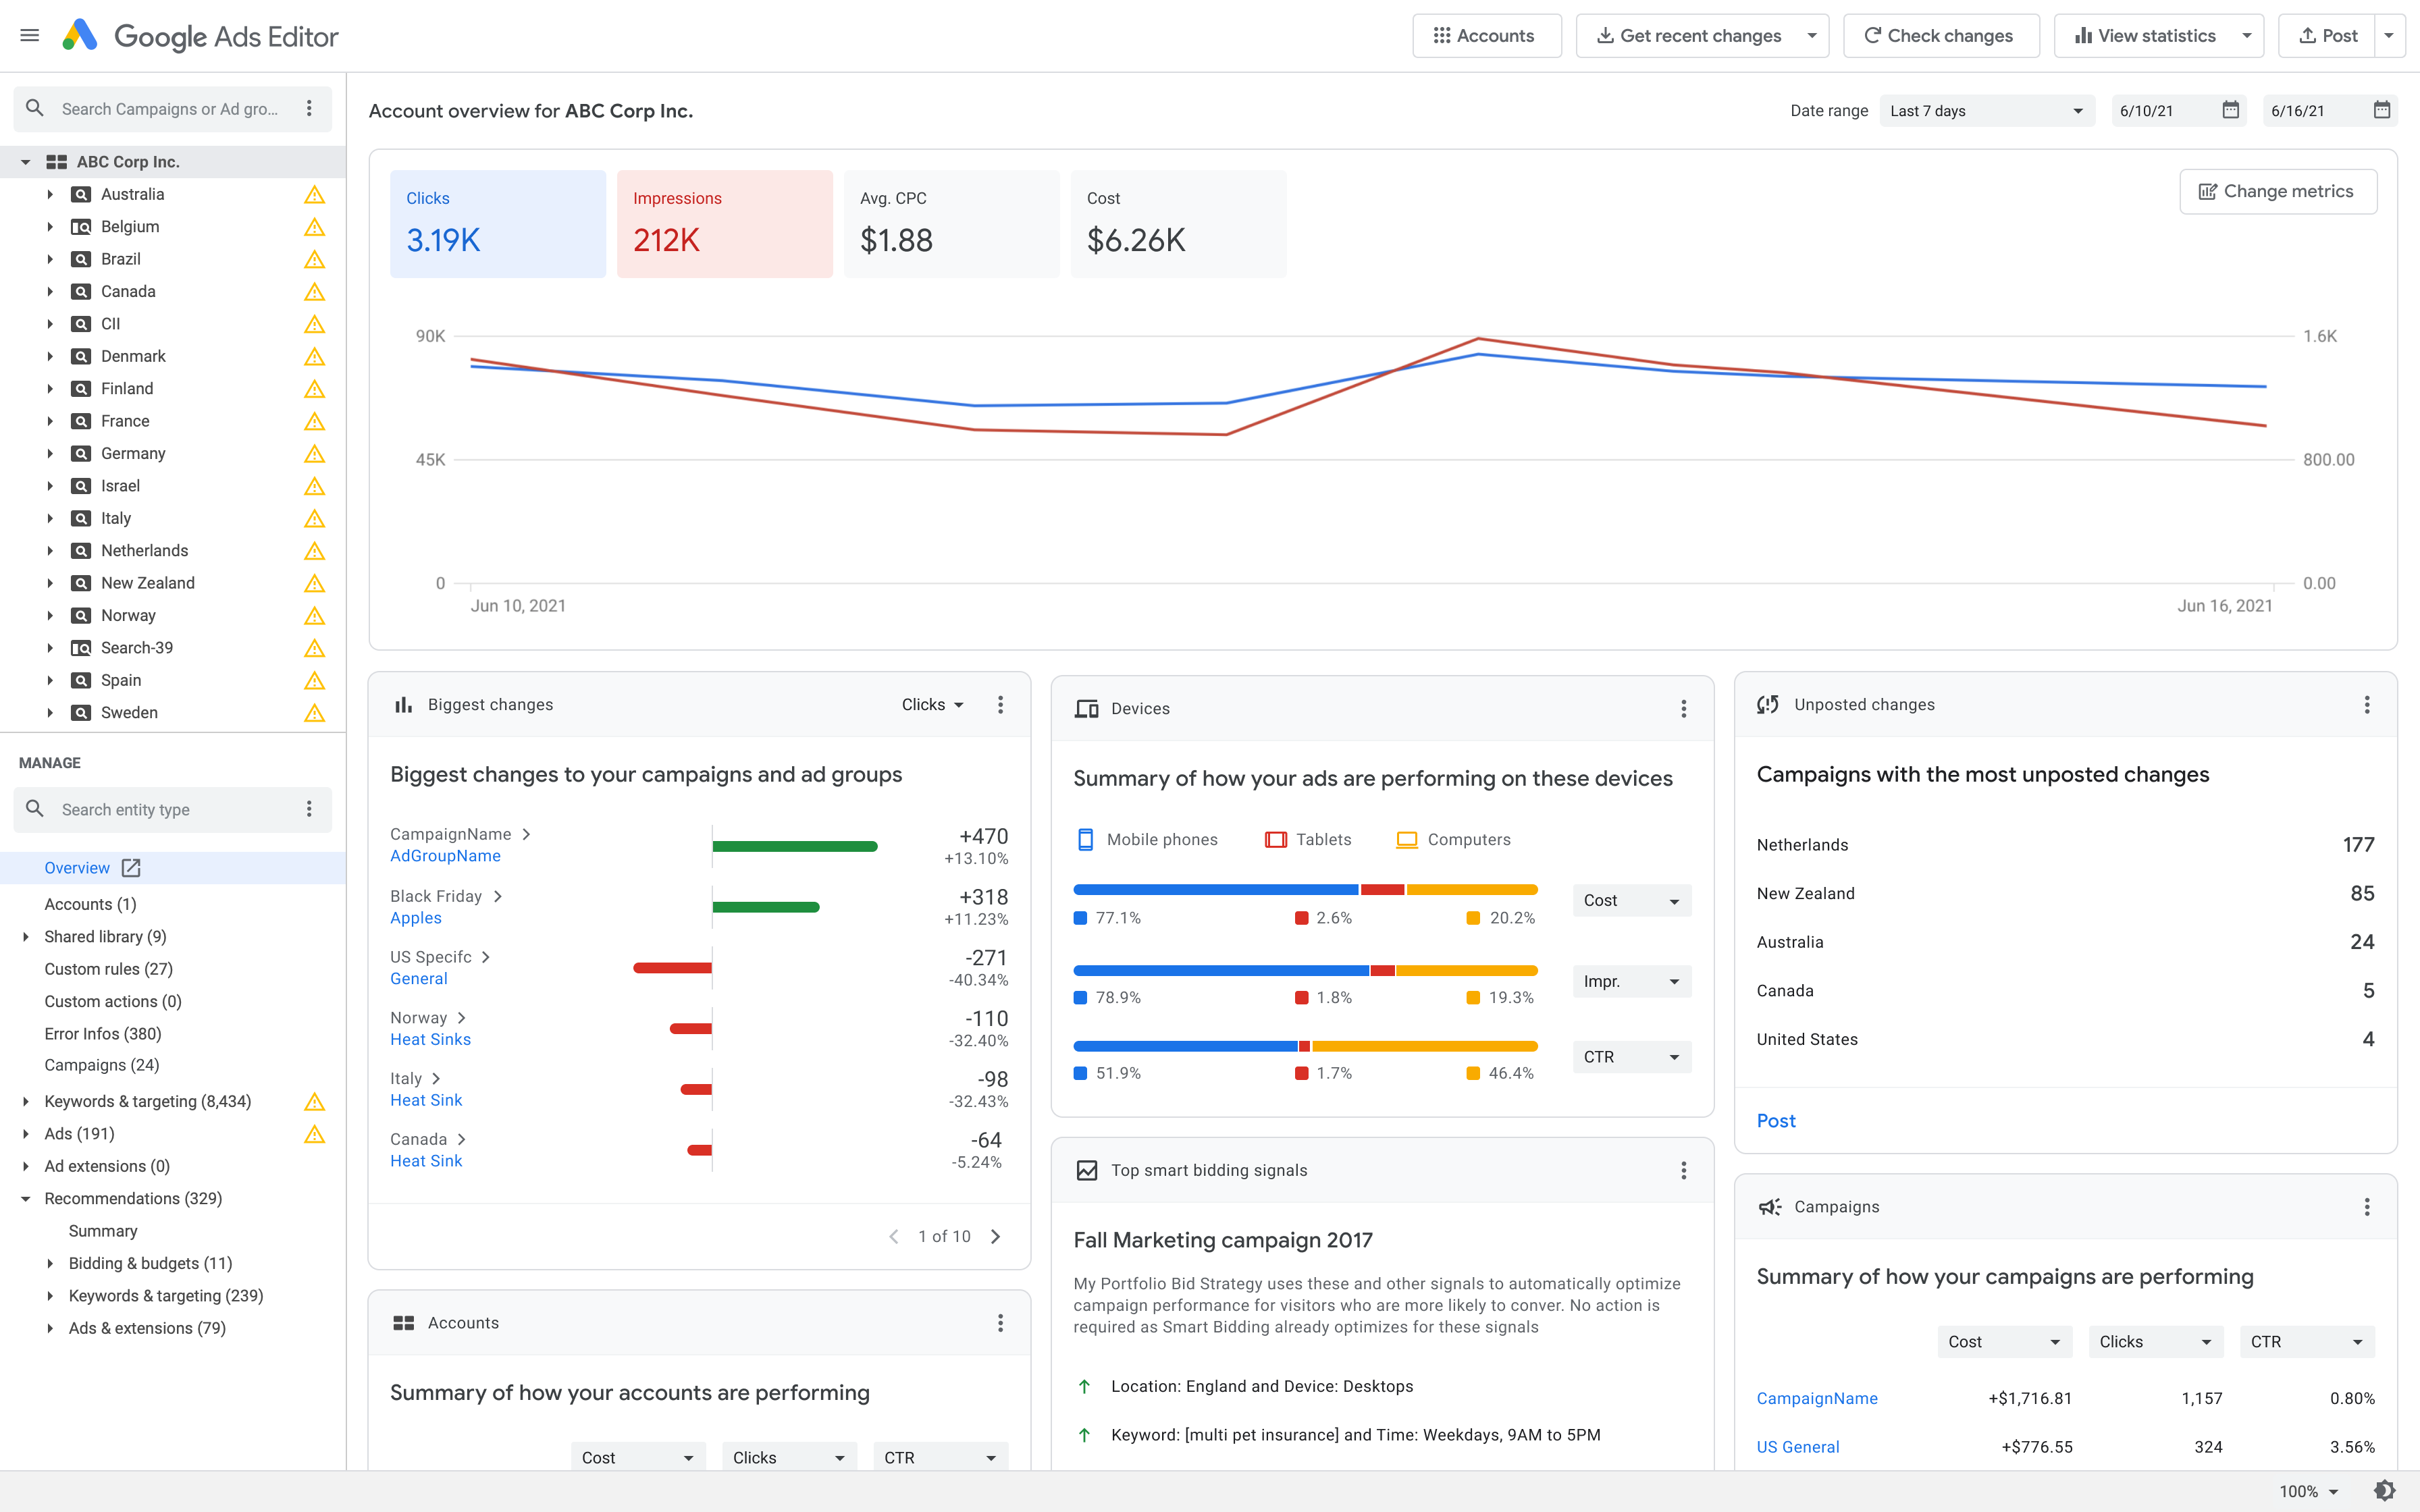 Example screenshot showing the summary of account performance and actionable insights on the Overview page in Google Ads editor.